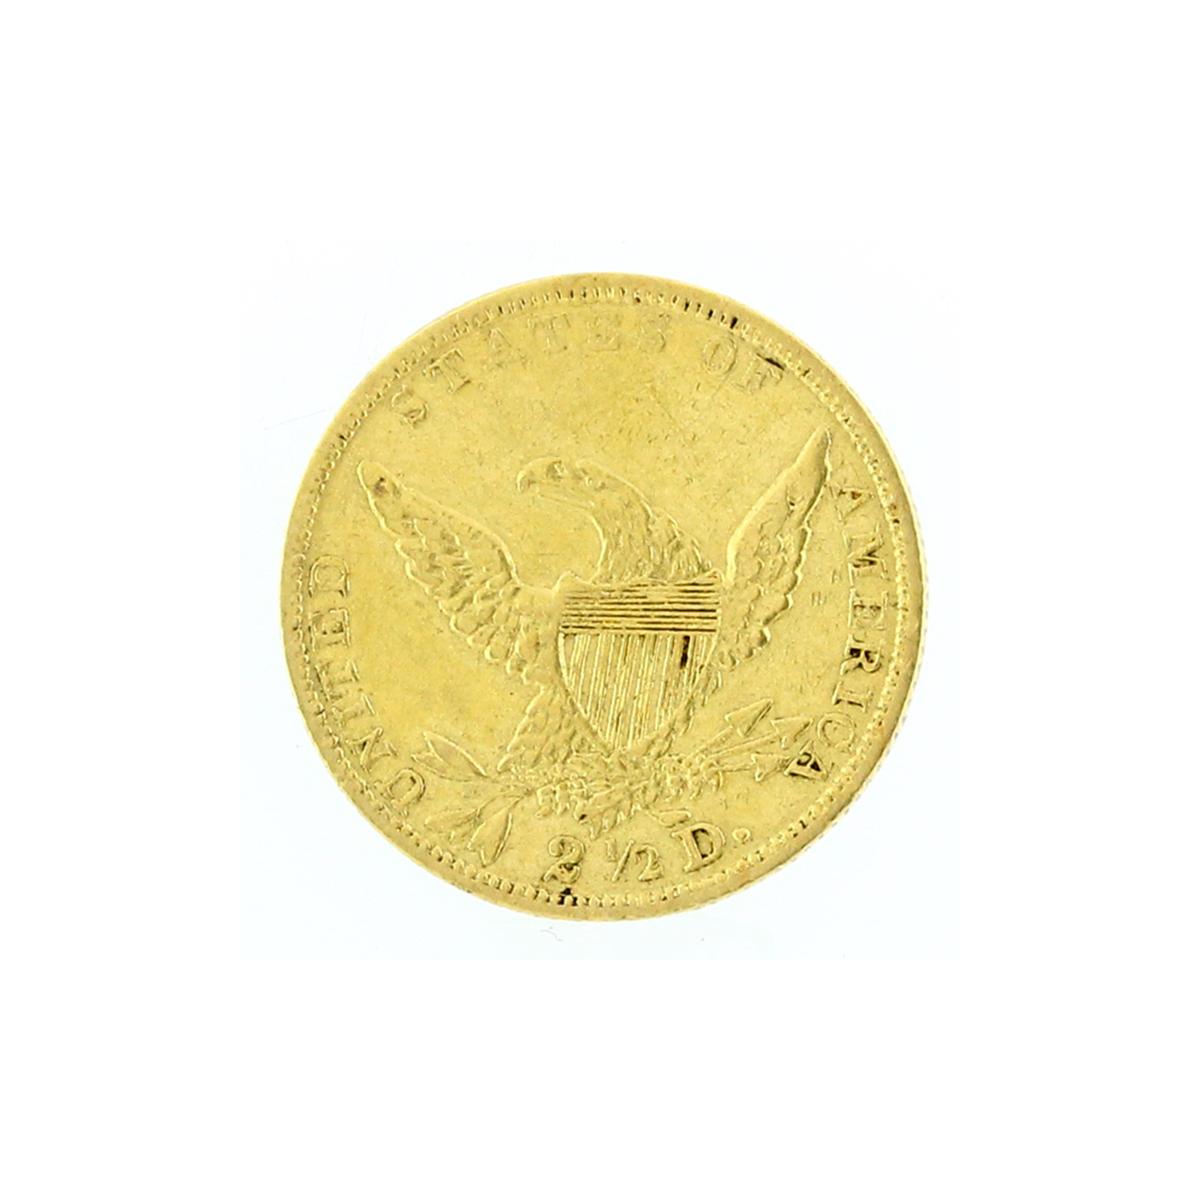 Rare 1836 $2.50 Classic Head Gold Coin Great Investment (DF)